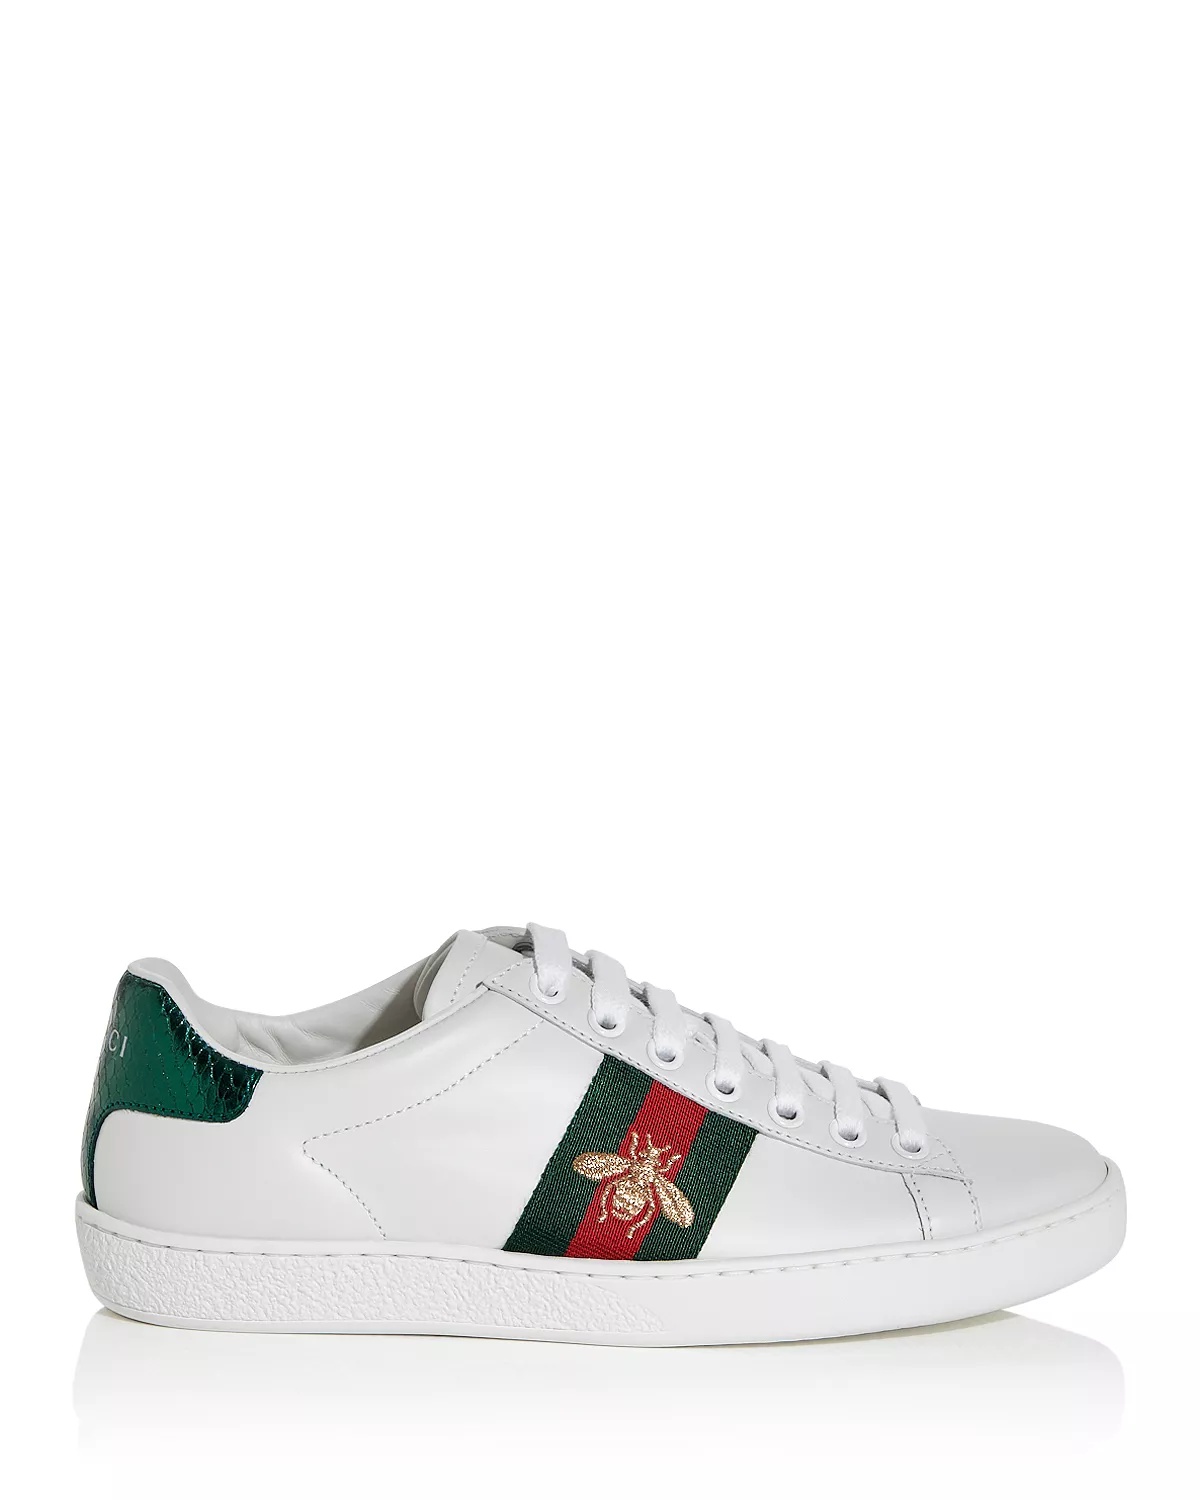 Women's Gucci Ace Embroidered Sneakers - 3